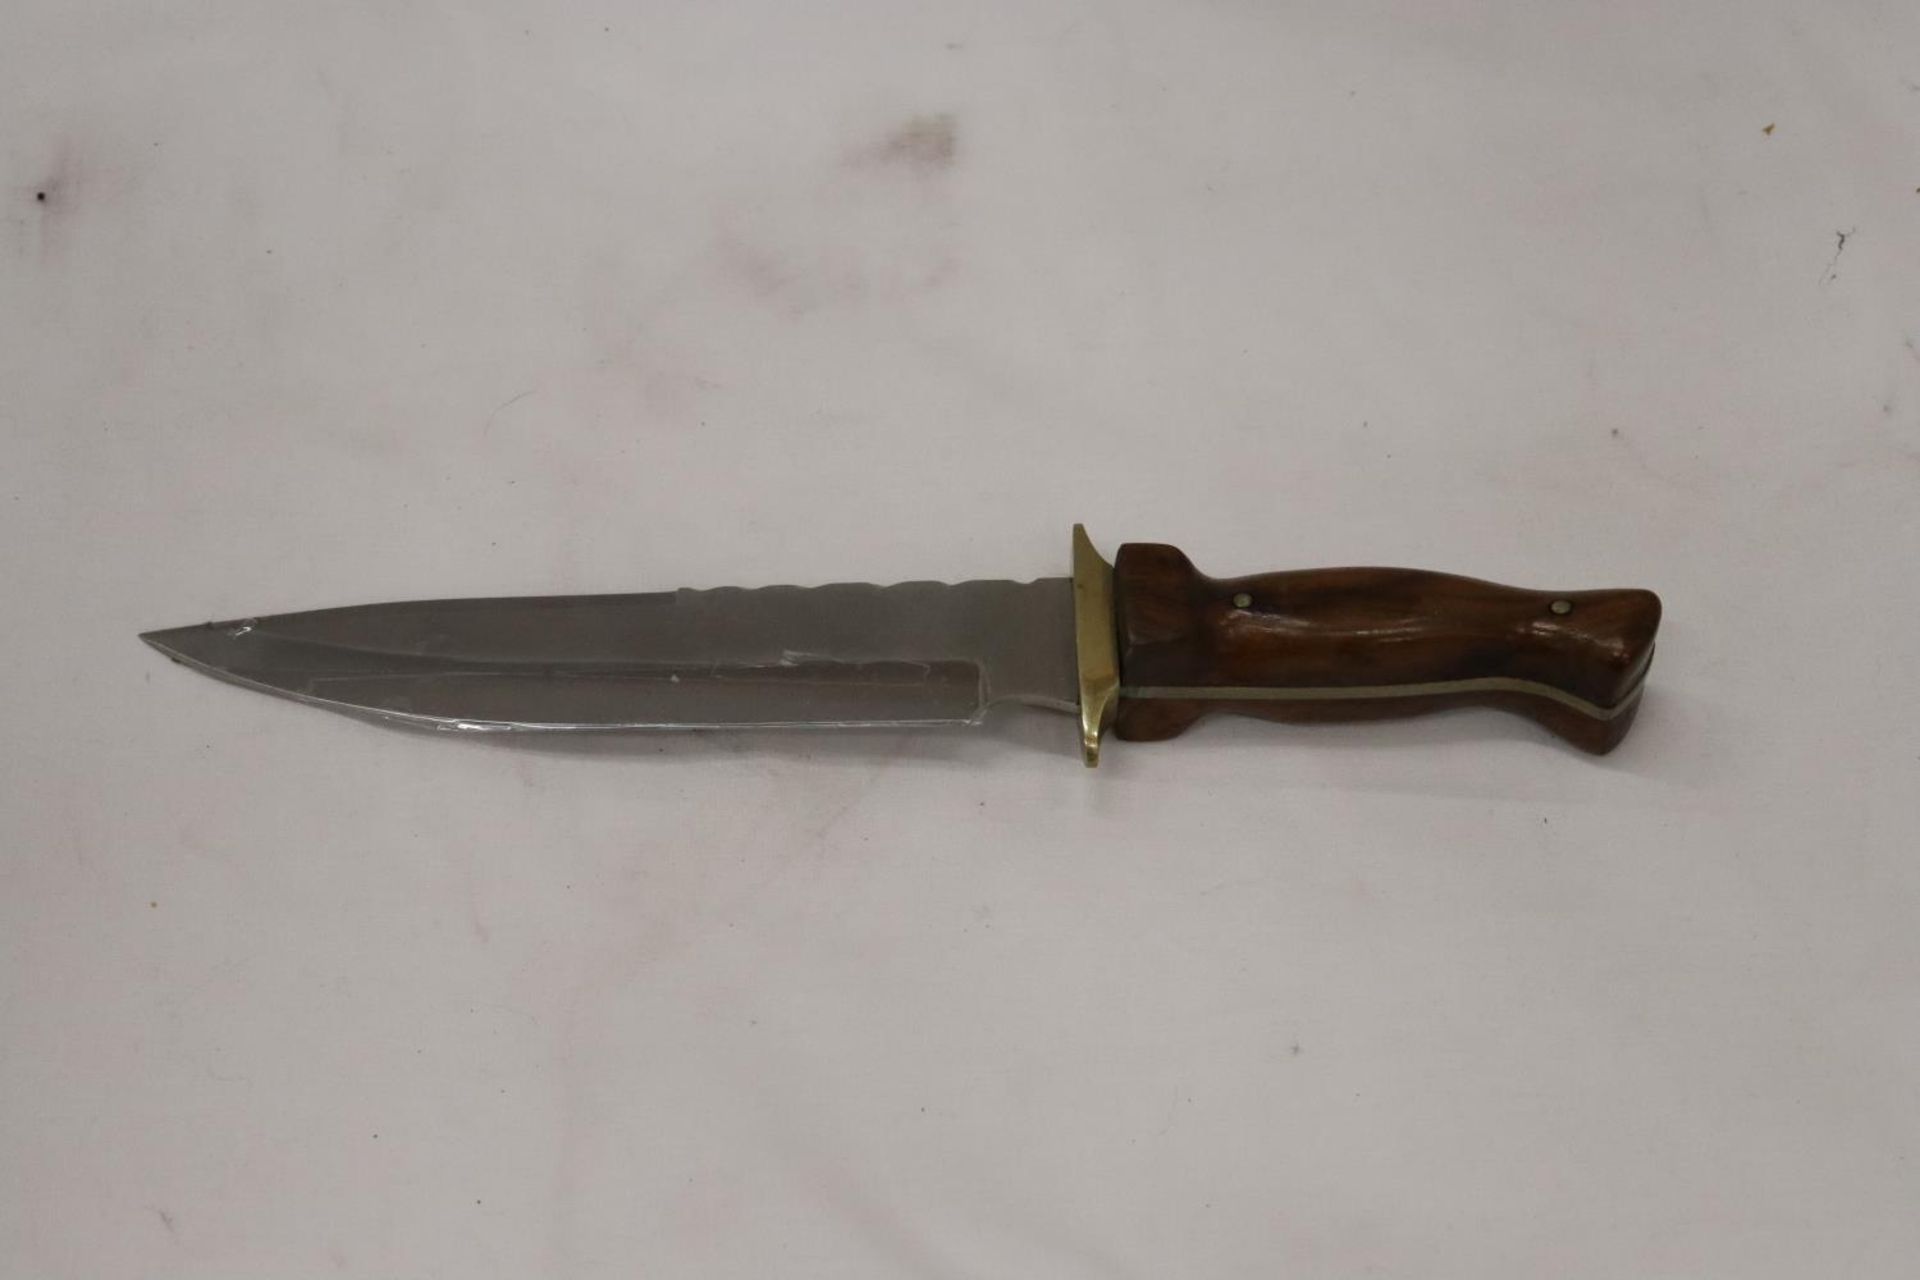 A HANDMADE DAGGER WITH WOODEN HANDLE - Image 2 of 4